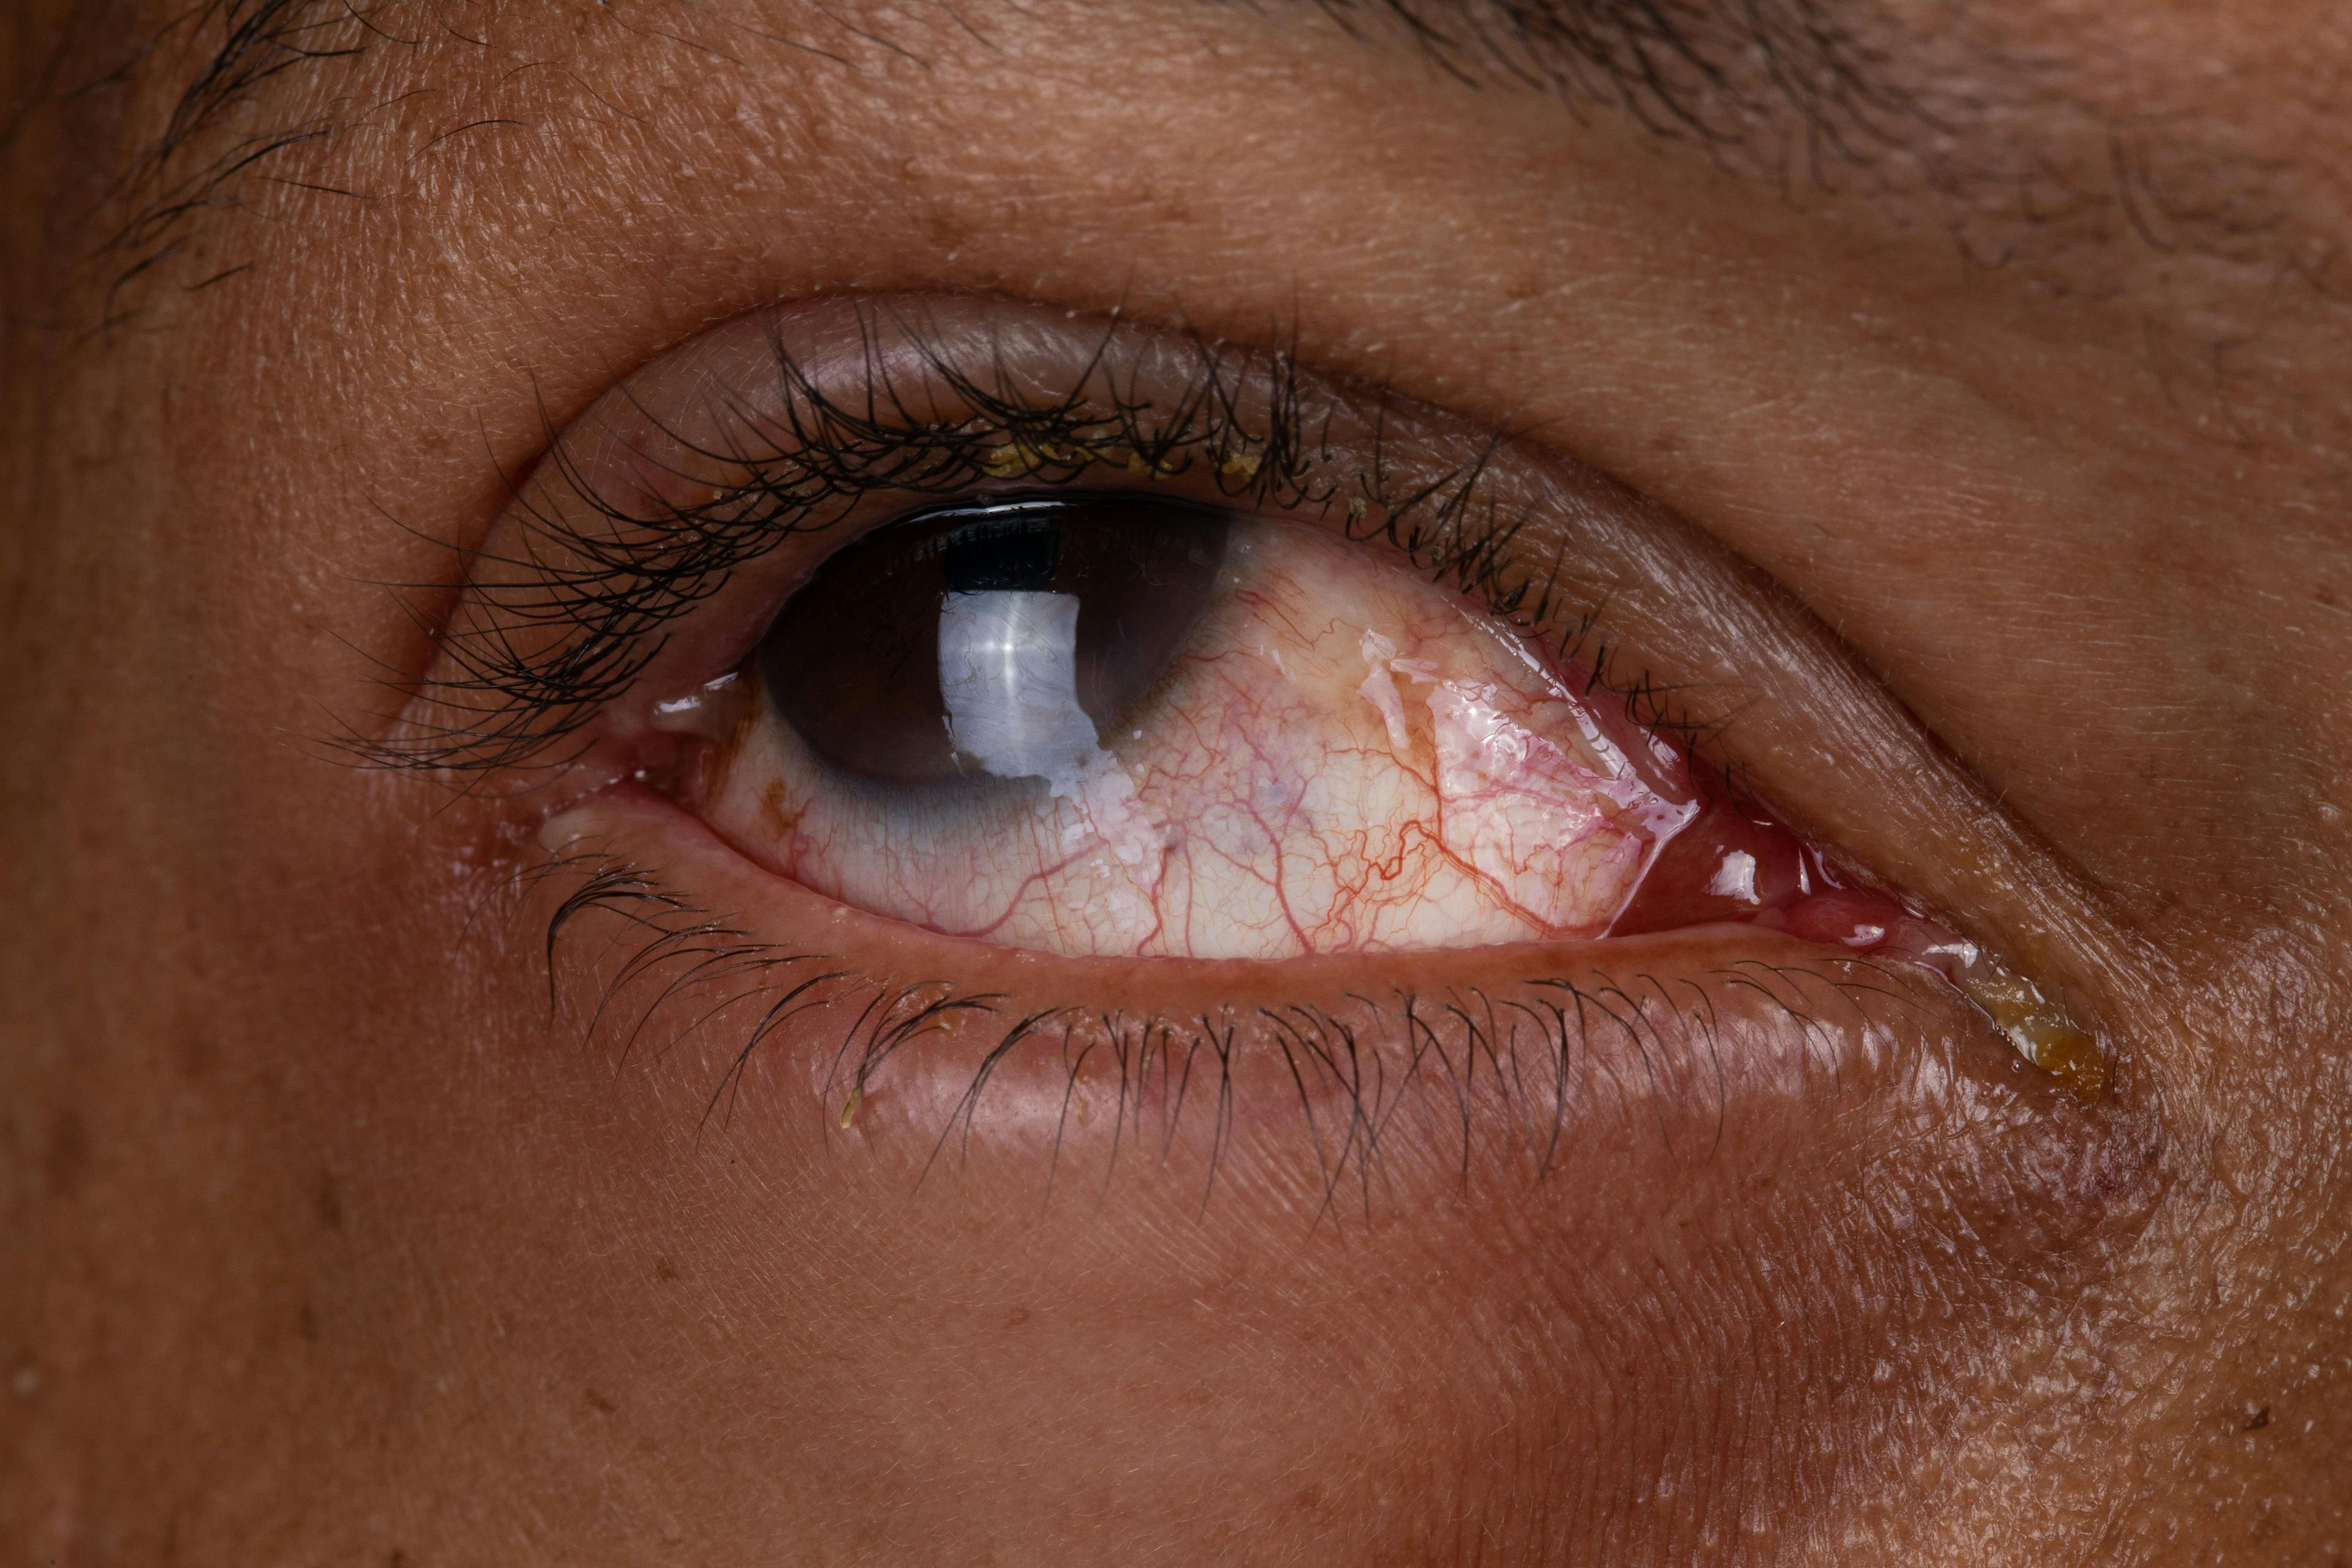 NEJM Publishes Data on the Application of B-VEC to Treat Ocular Complications in Patients with DEB  